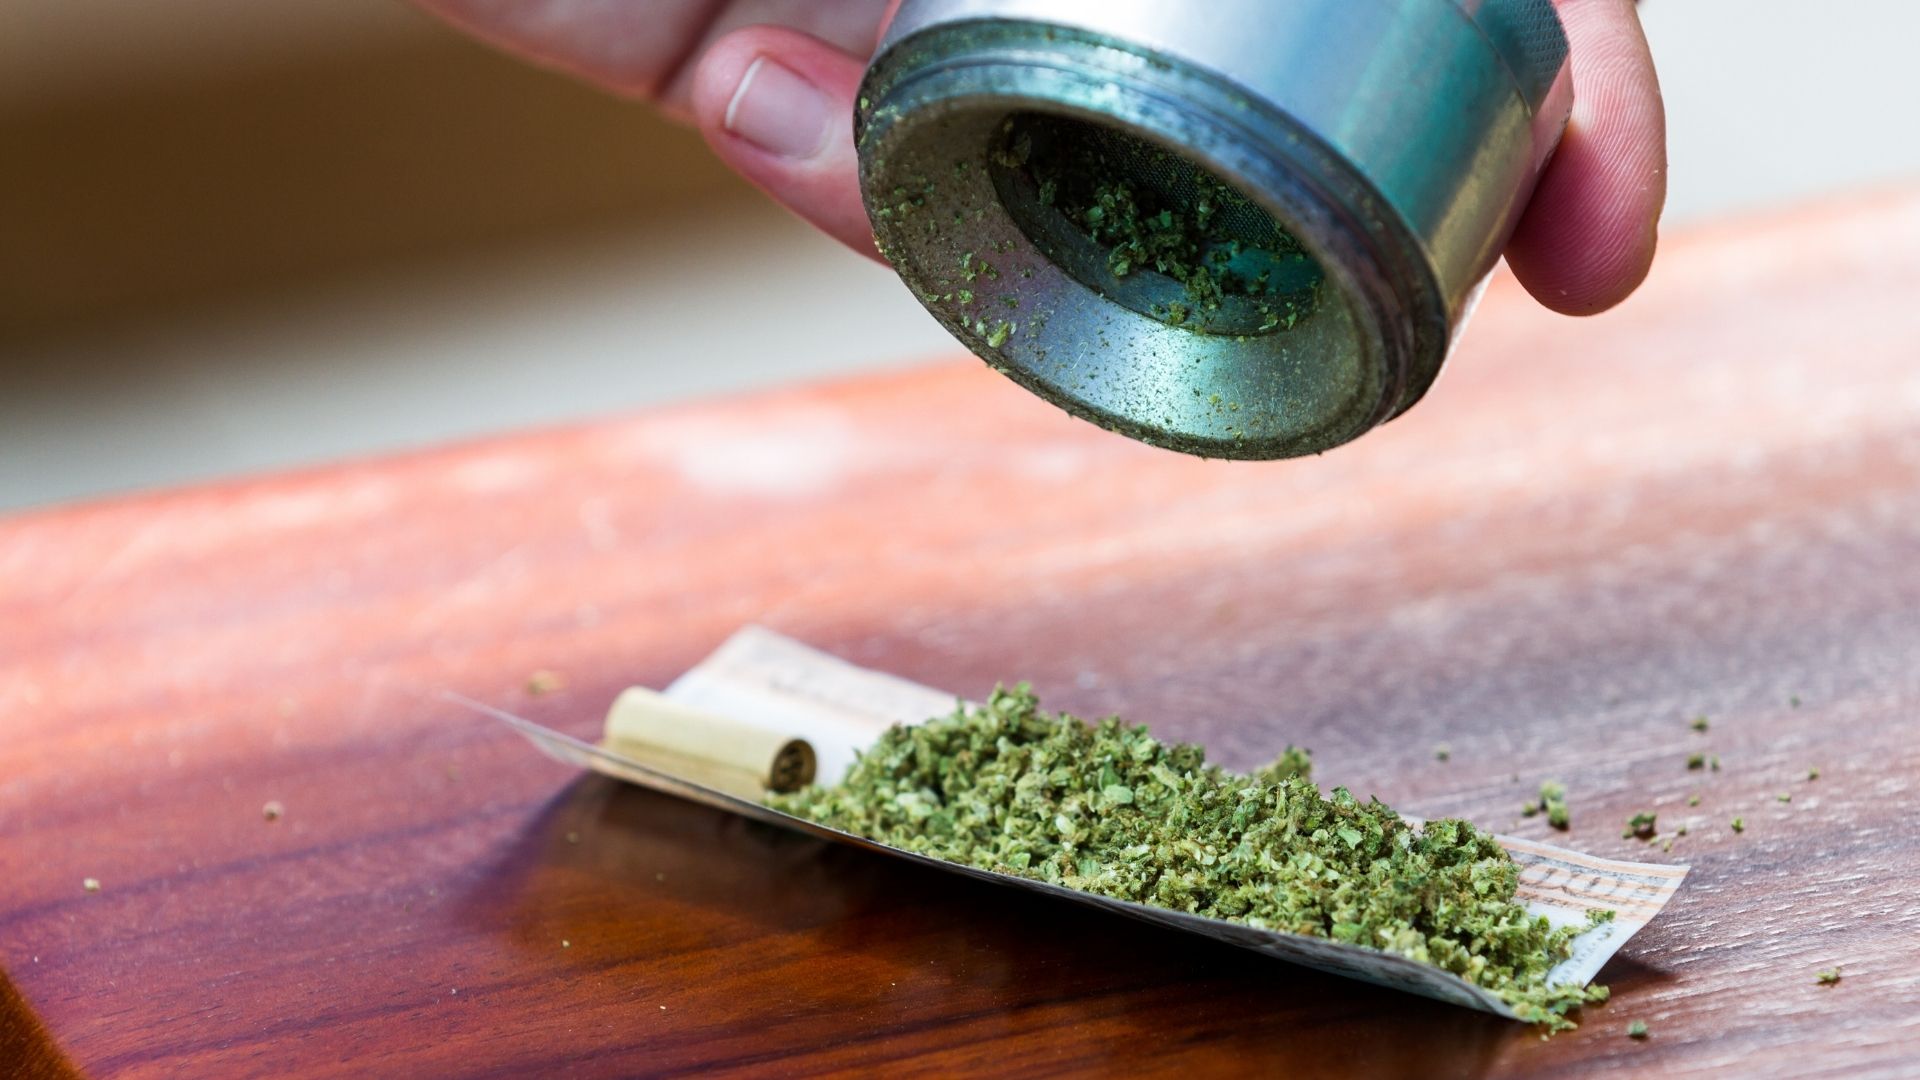 Can You Mix Indica and Sativa Strains?